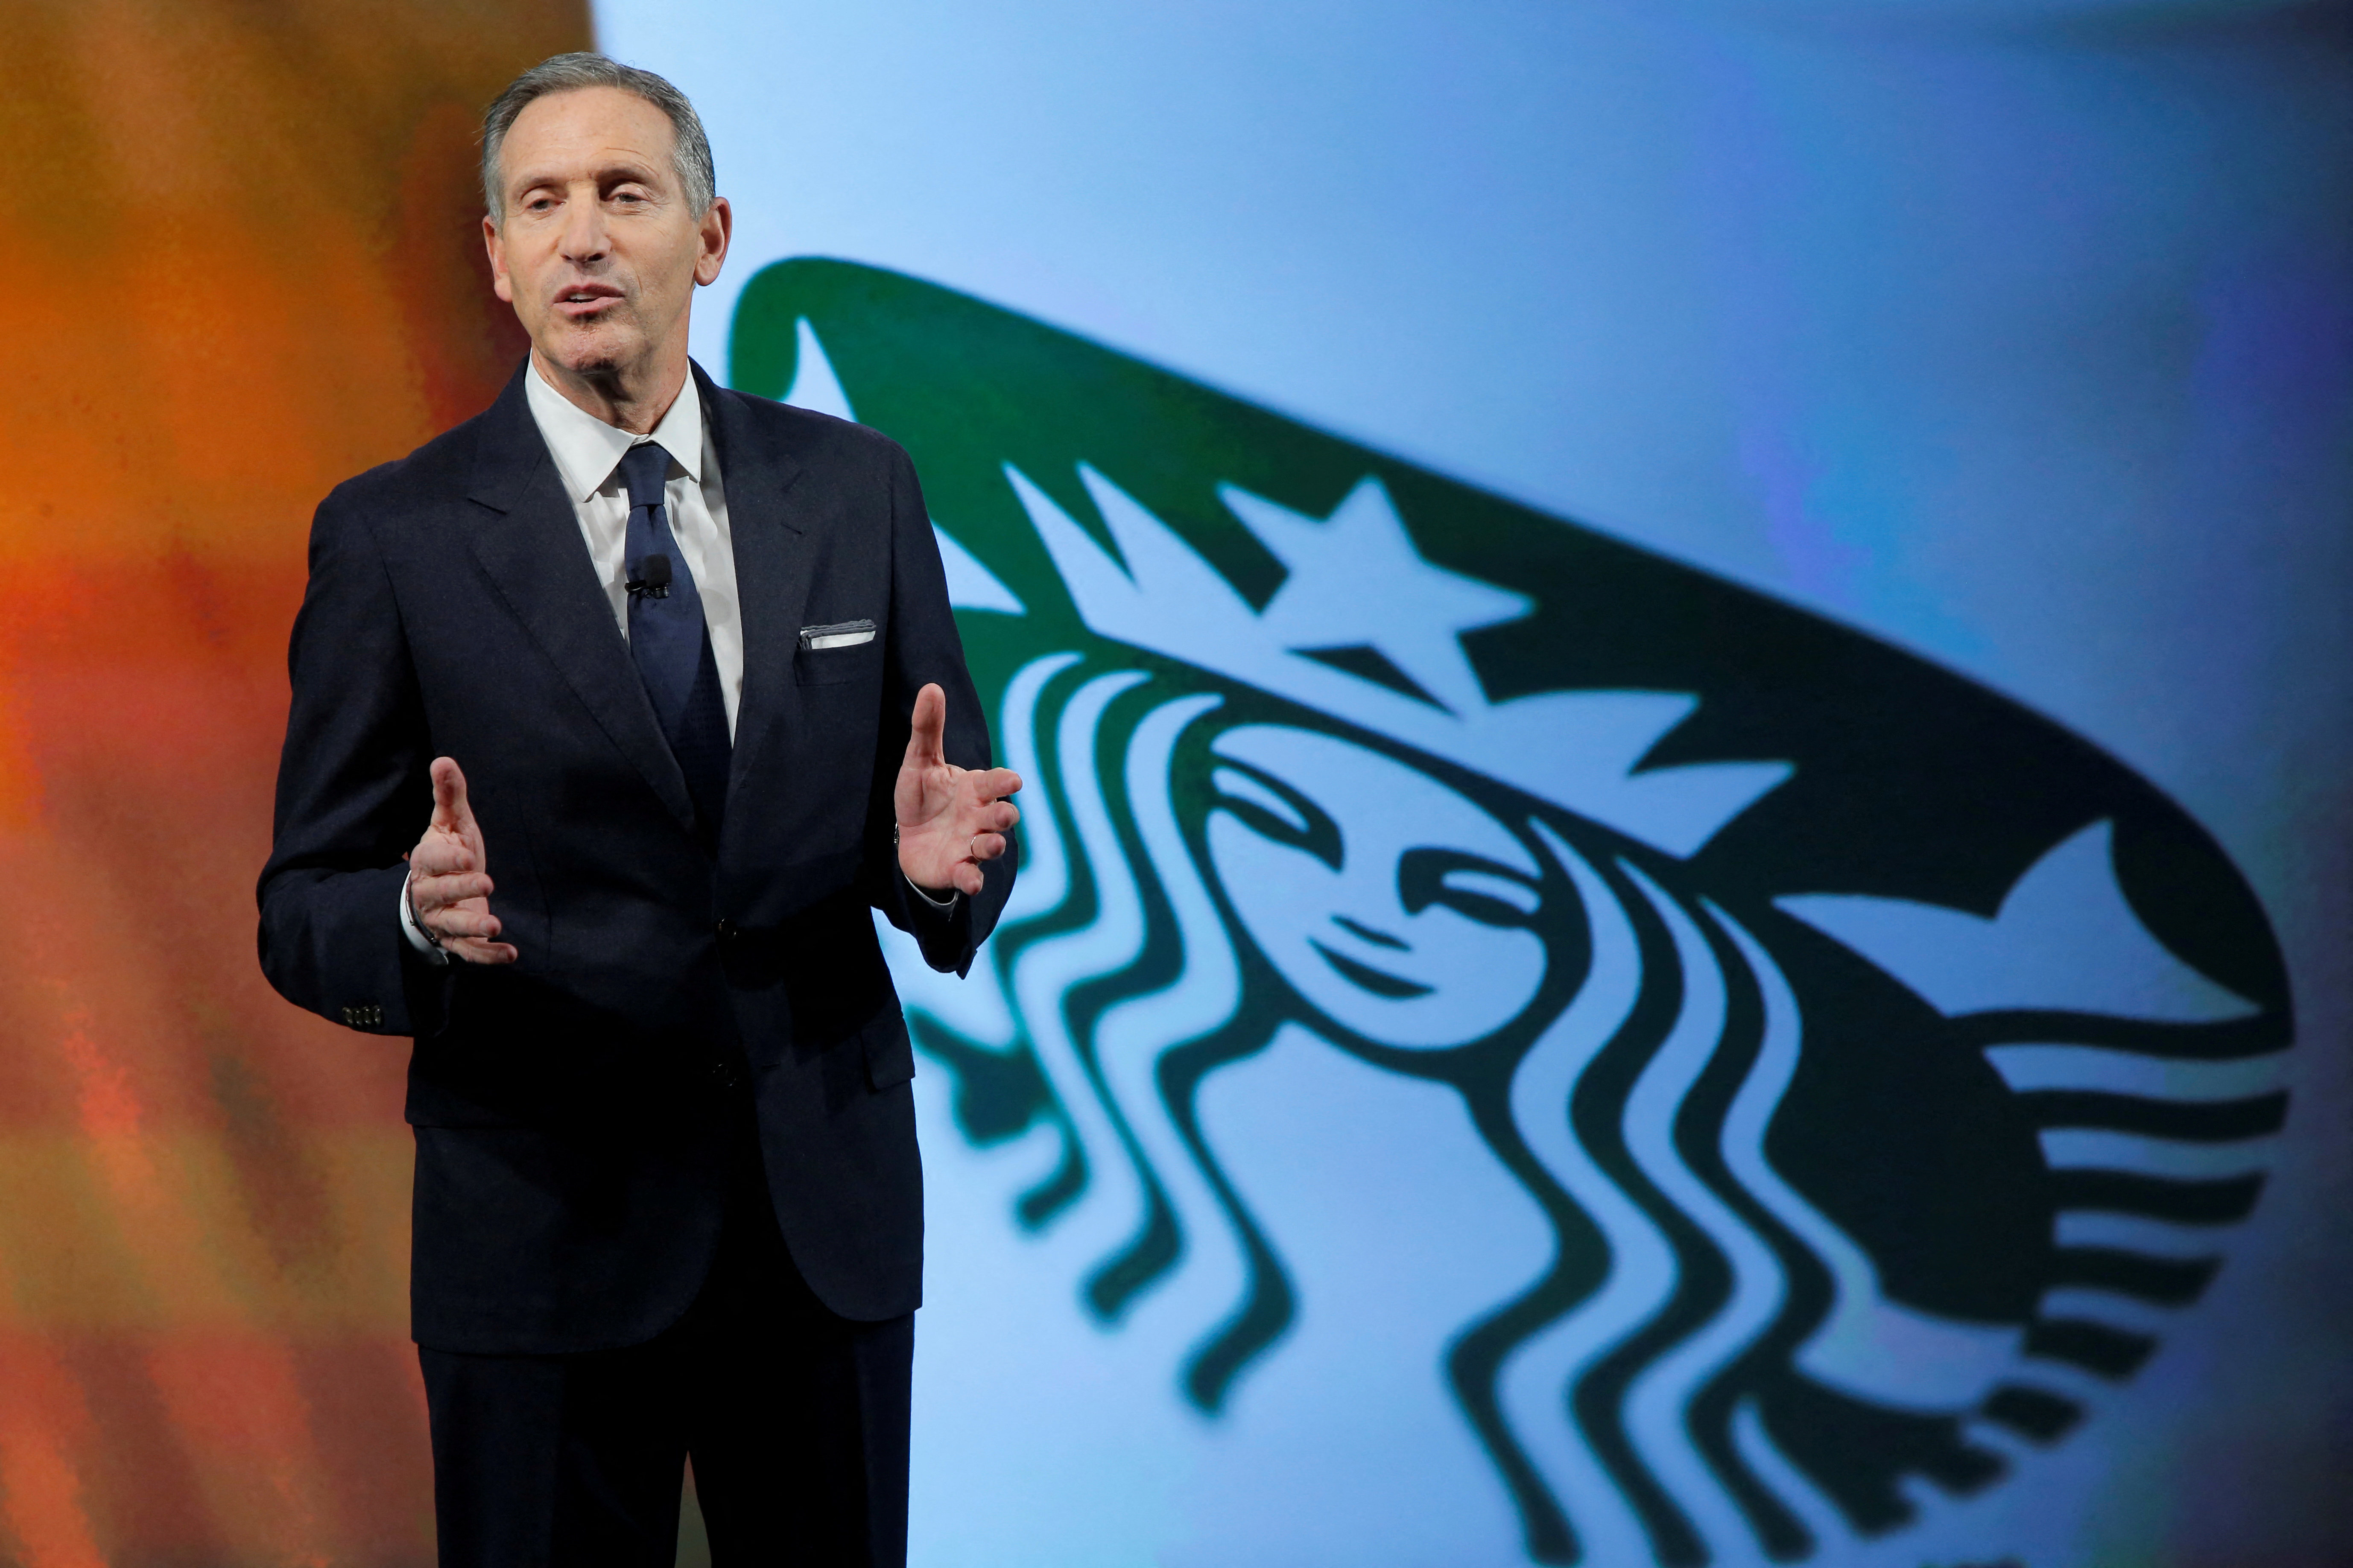 Starbucks Chairman and CEO Schultz delivers remarks at the Starbucks 2016 Investor Day in Manhattan, New York